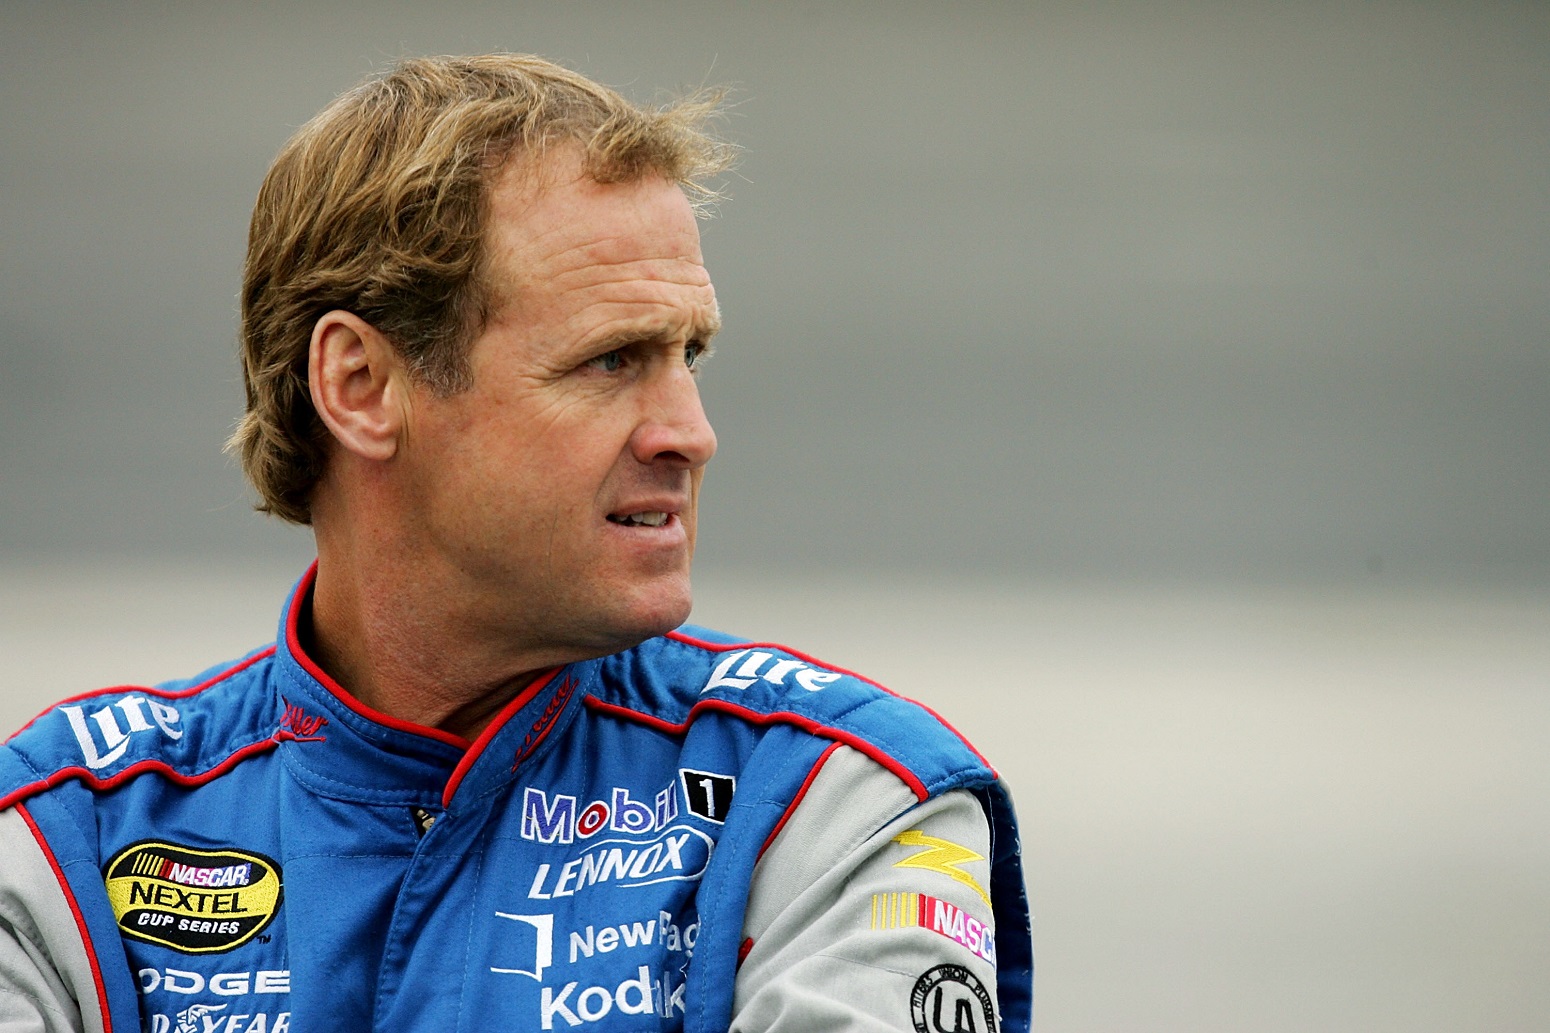 NASCAR driver Rusty Wallace stands on the track and looks off into the distance while wearing his suit